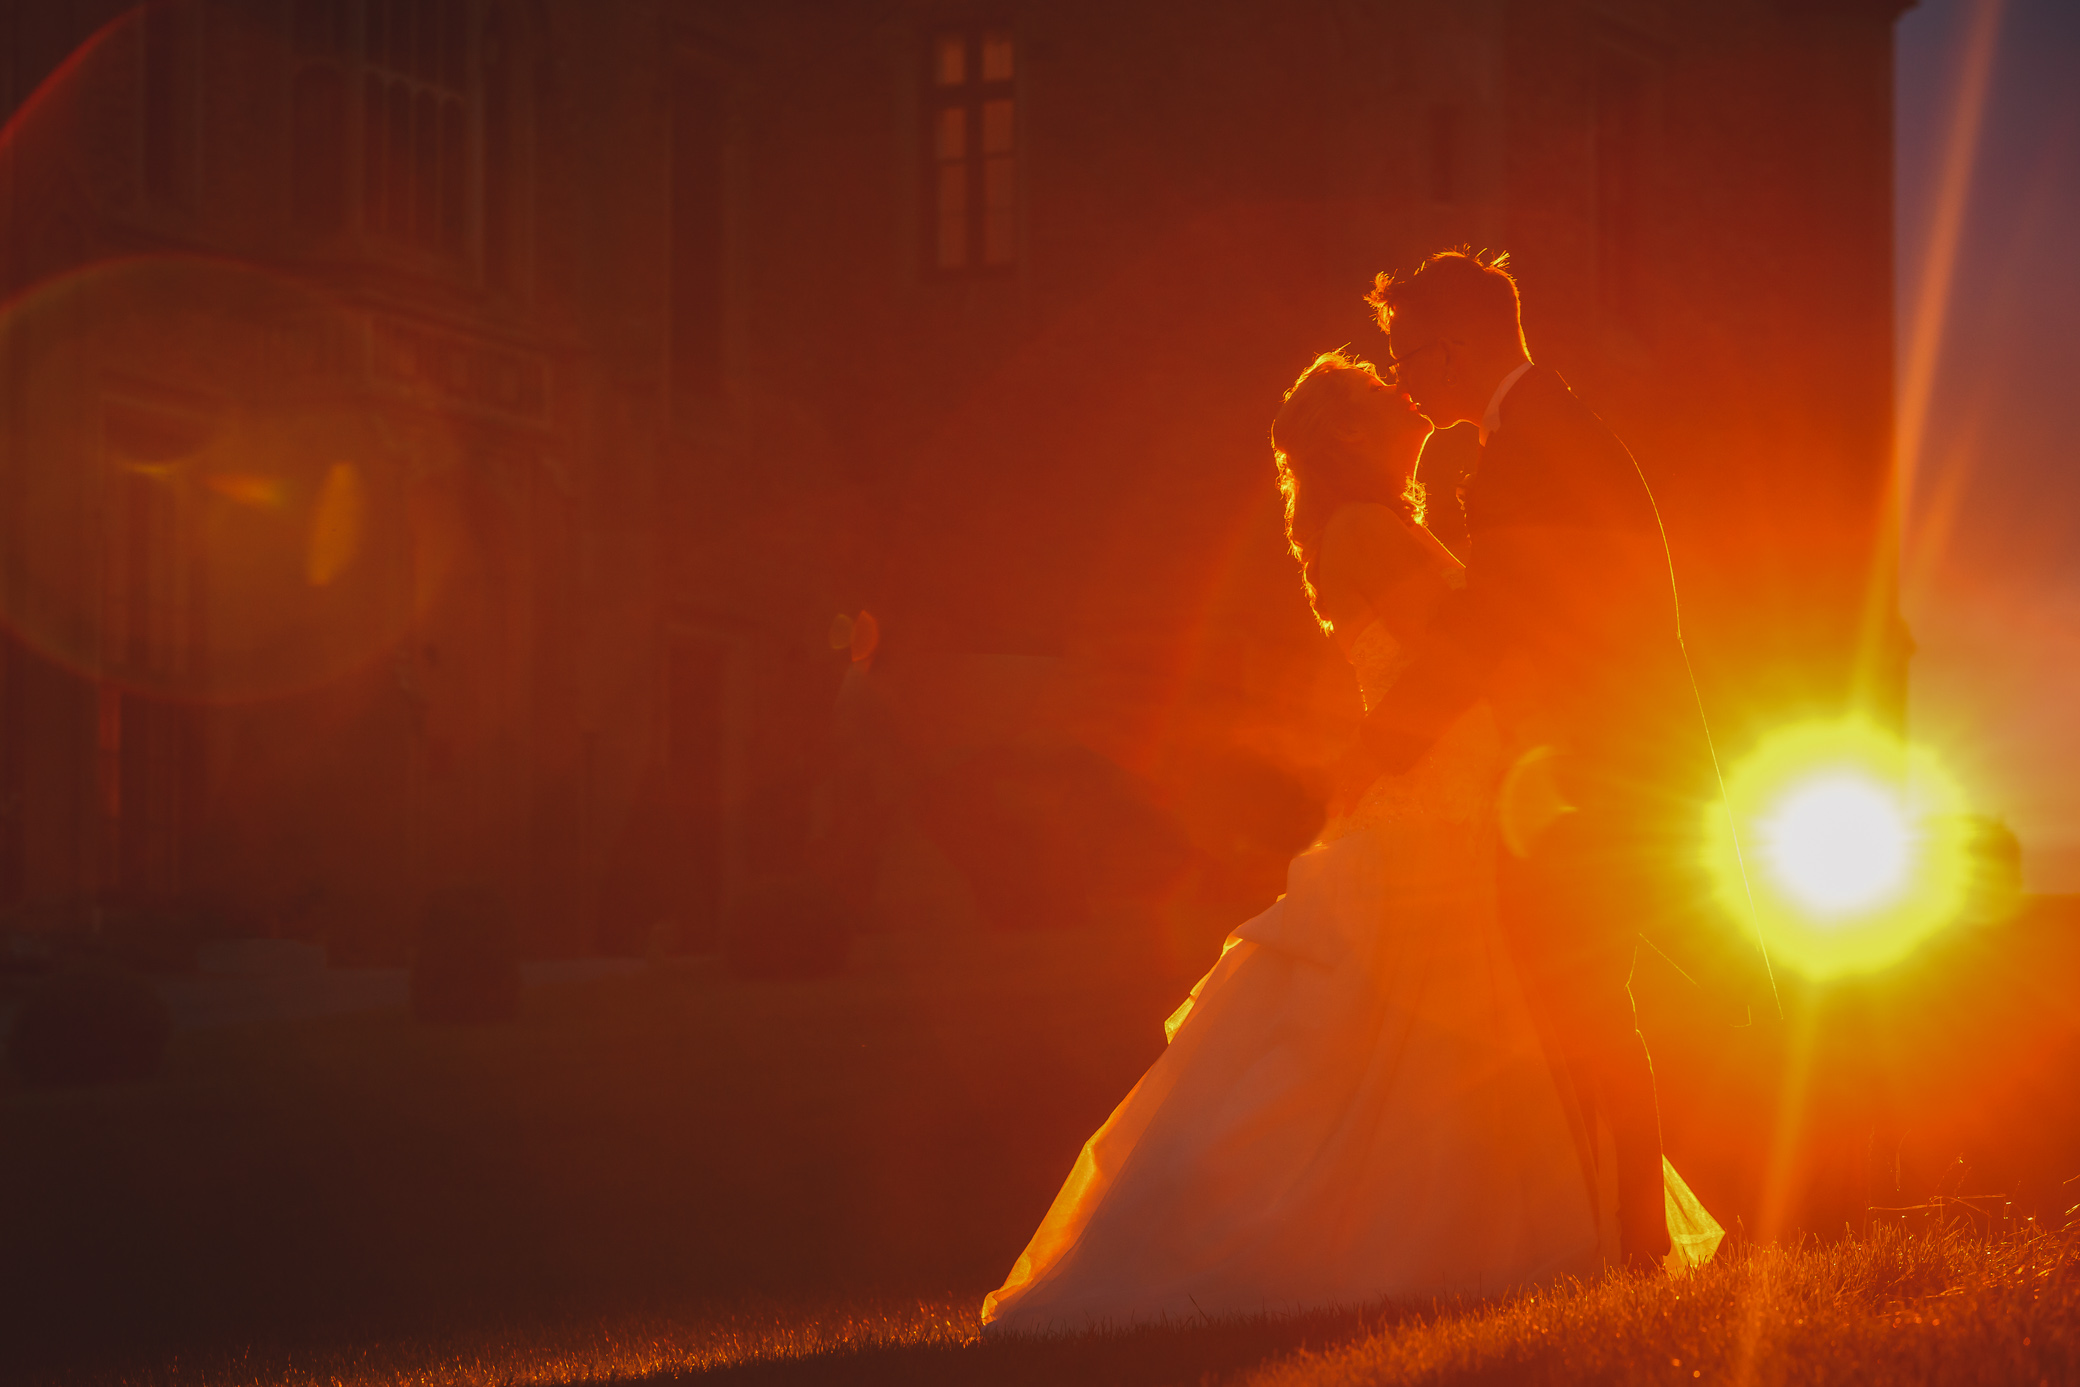 Rowton Castle Wedding Photography - sunset wedding portrait outside Rowton Castle with bride and groom